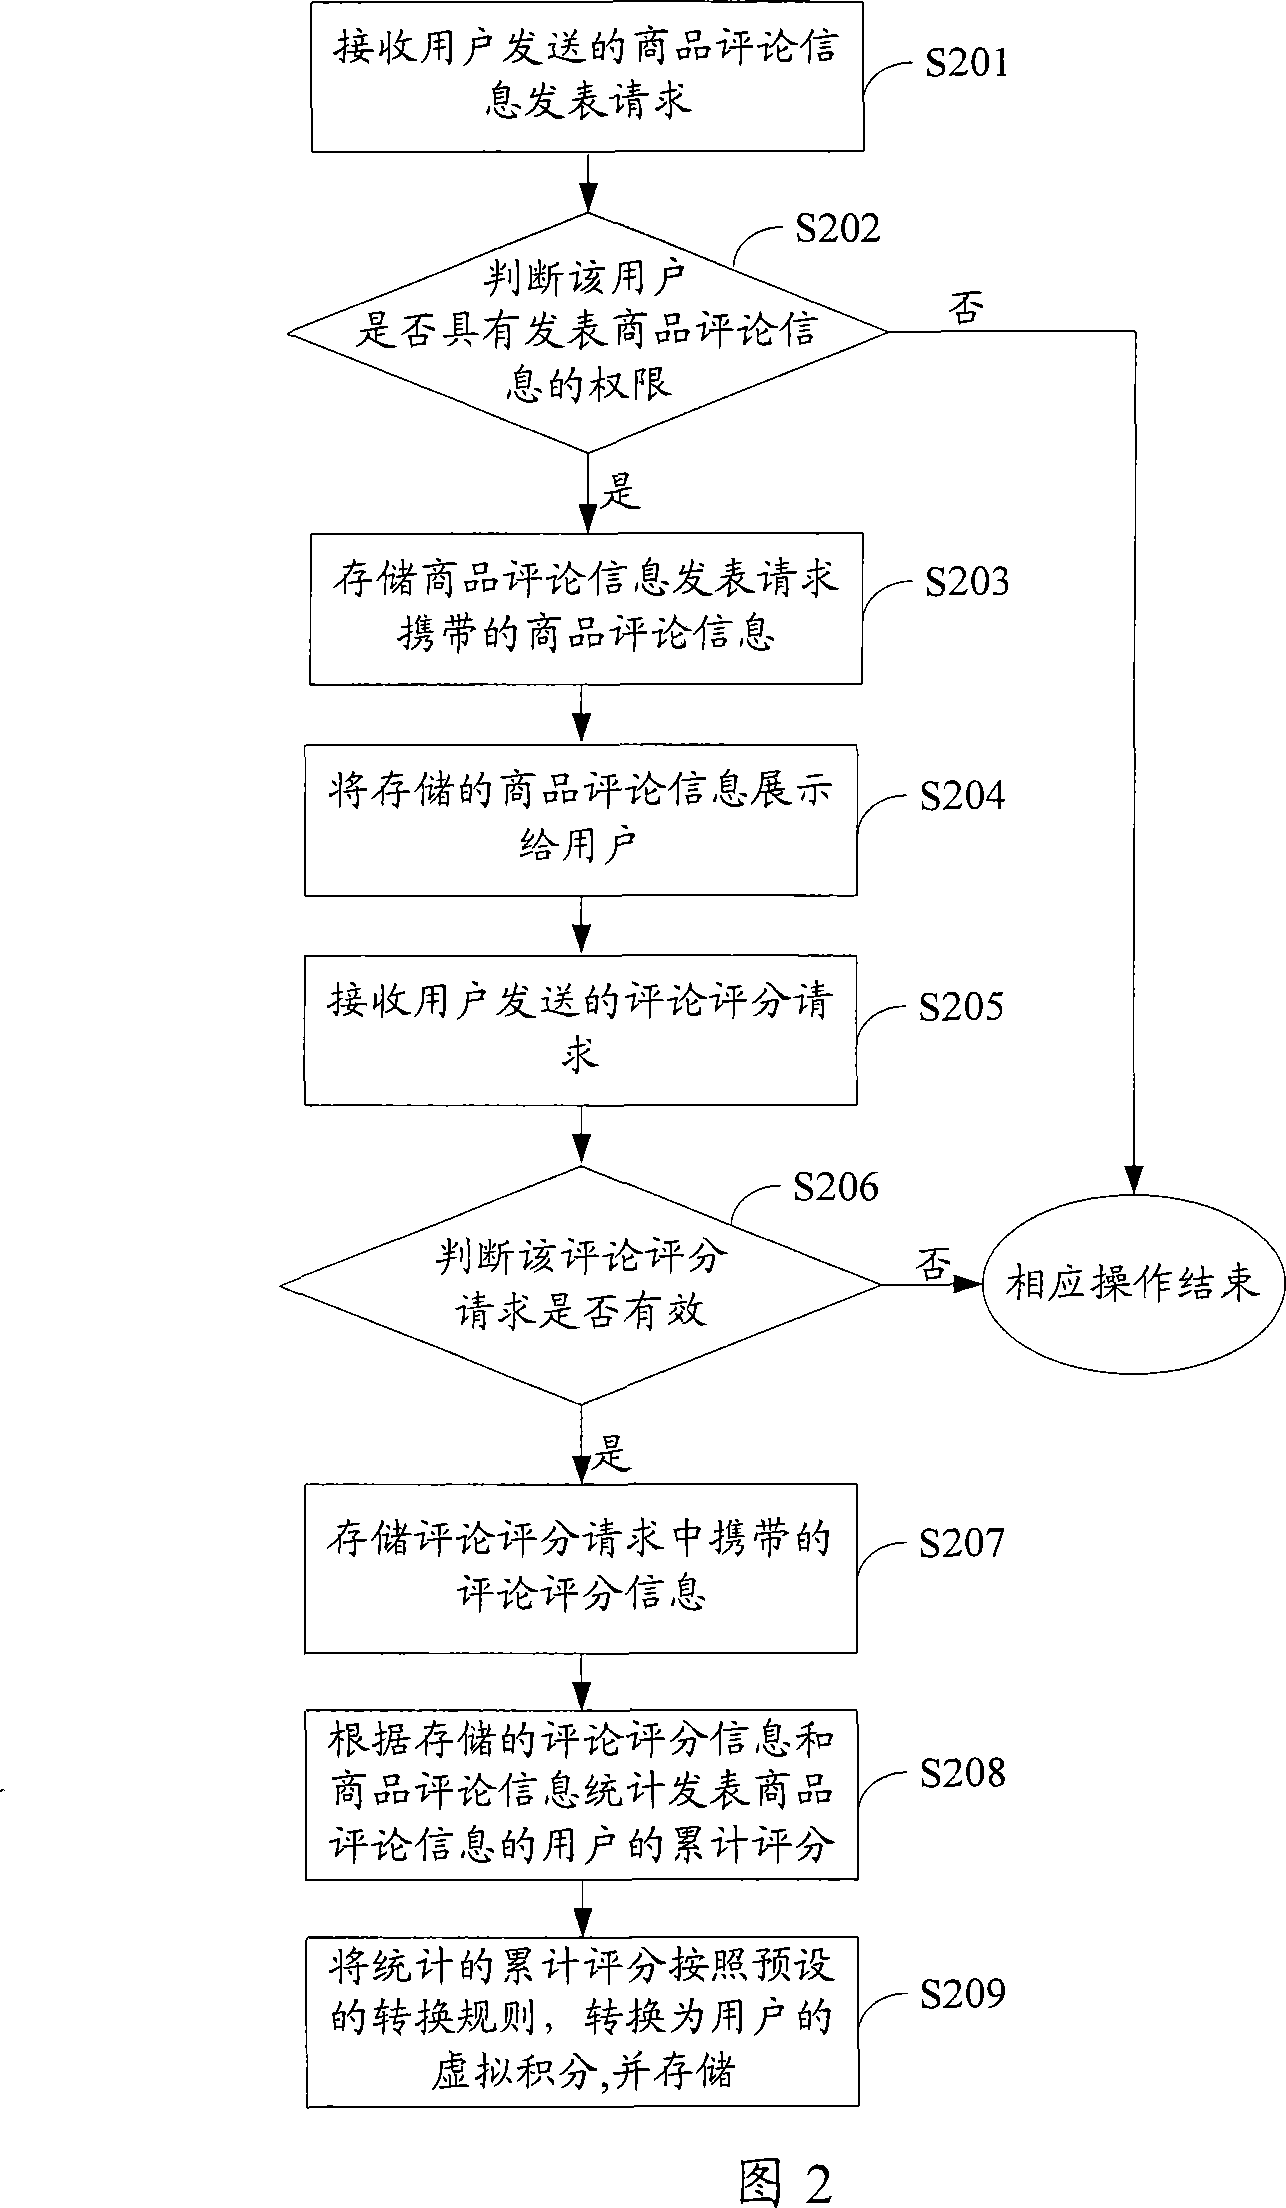 Method and system for exchange feedback in electronic commerce transaction system